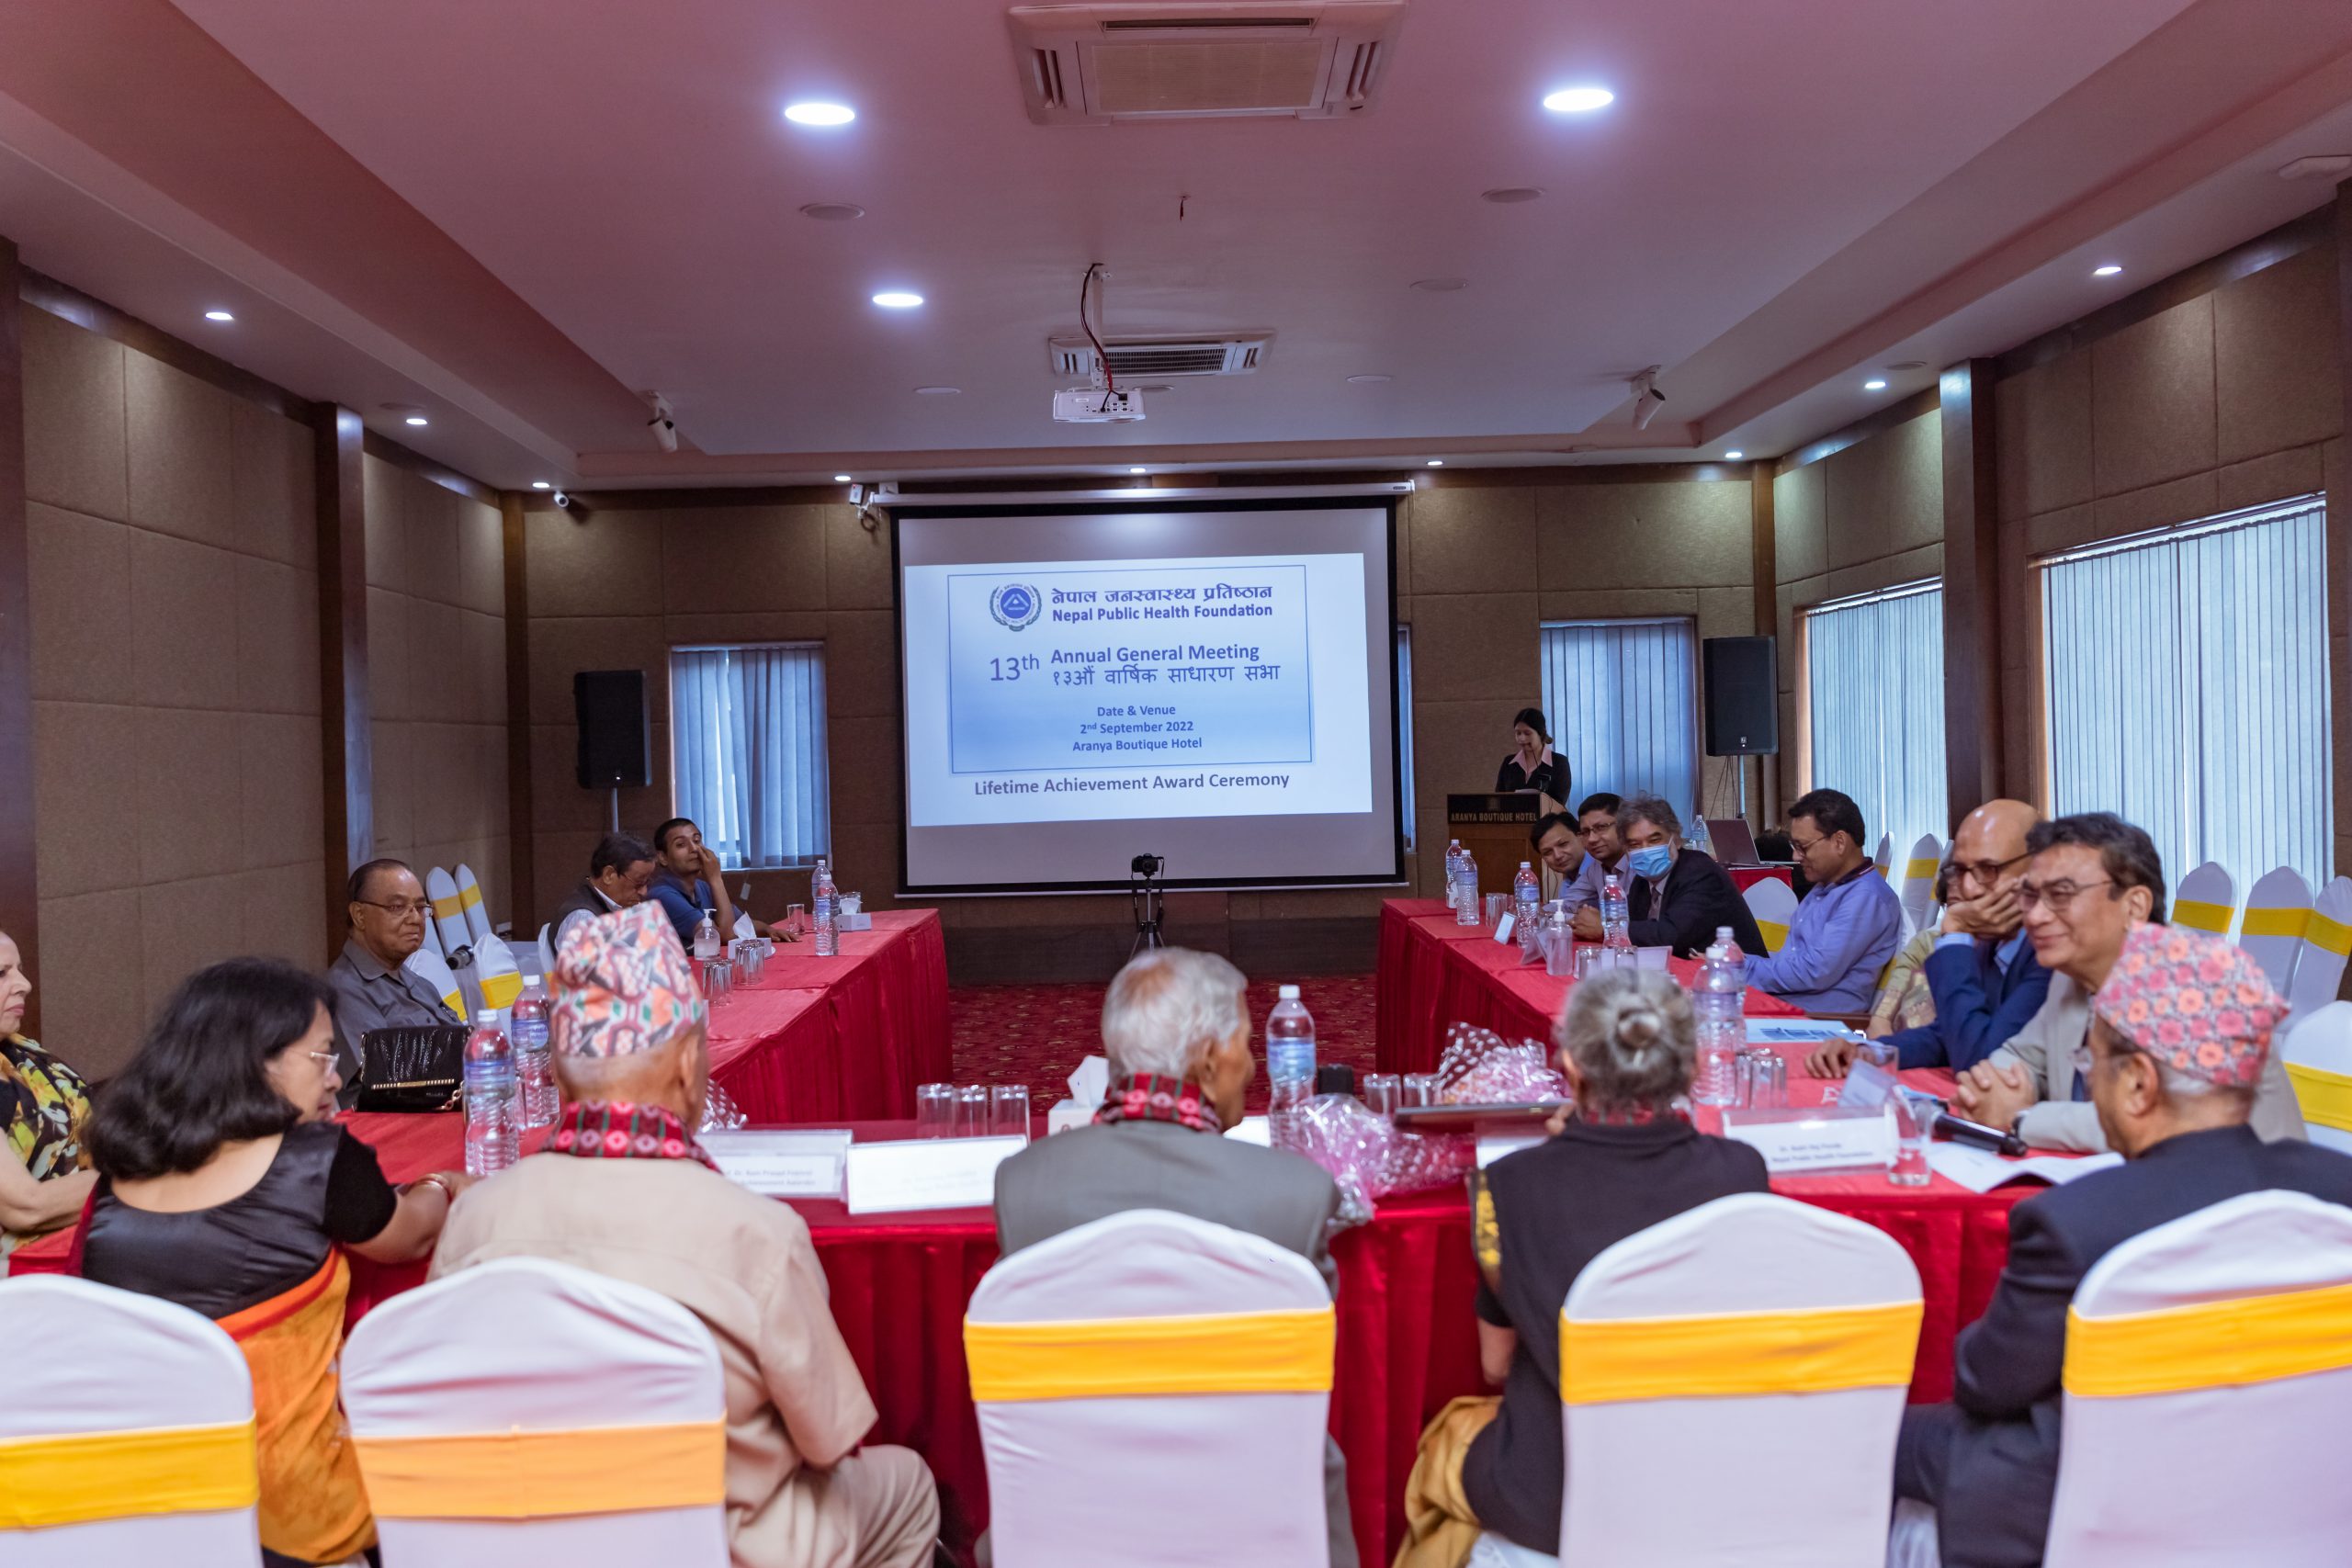 13th ANNUAL GENERAL MEETING OF NPHF WAS SUCCESSFULLY CONDUCTED ON SEPT 2, 2022